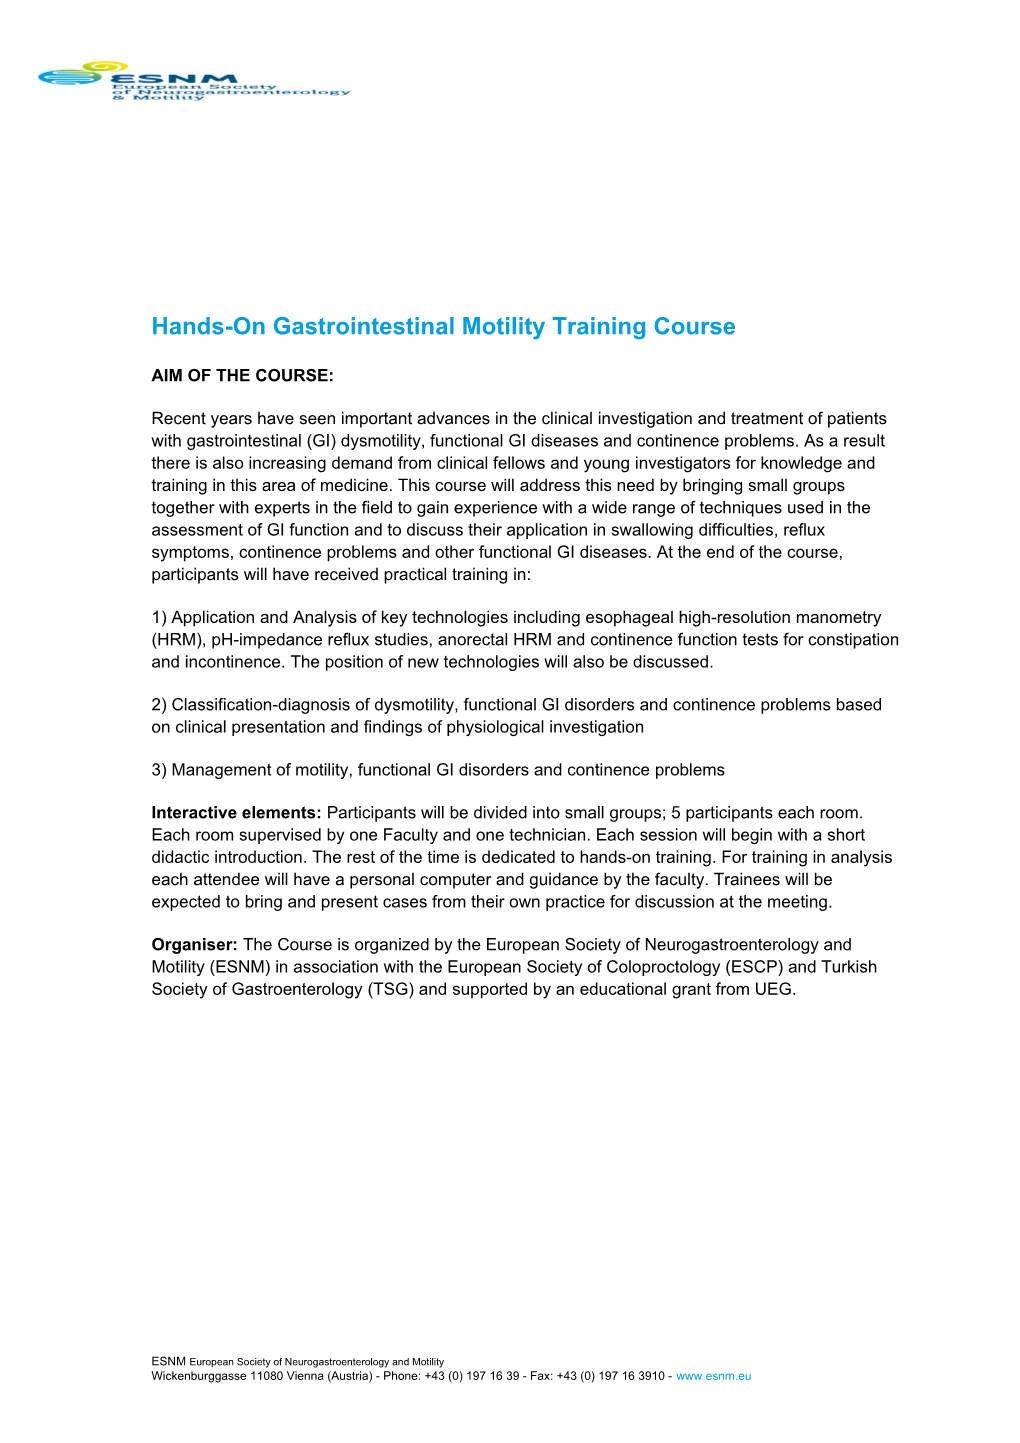 Hands-On Gastrointestinal Motility Training Course